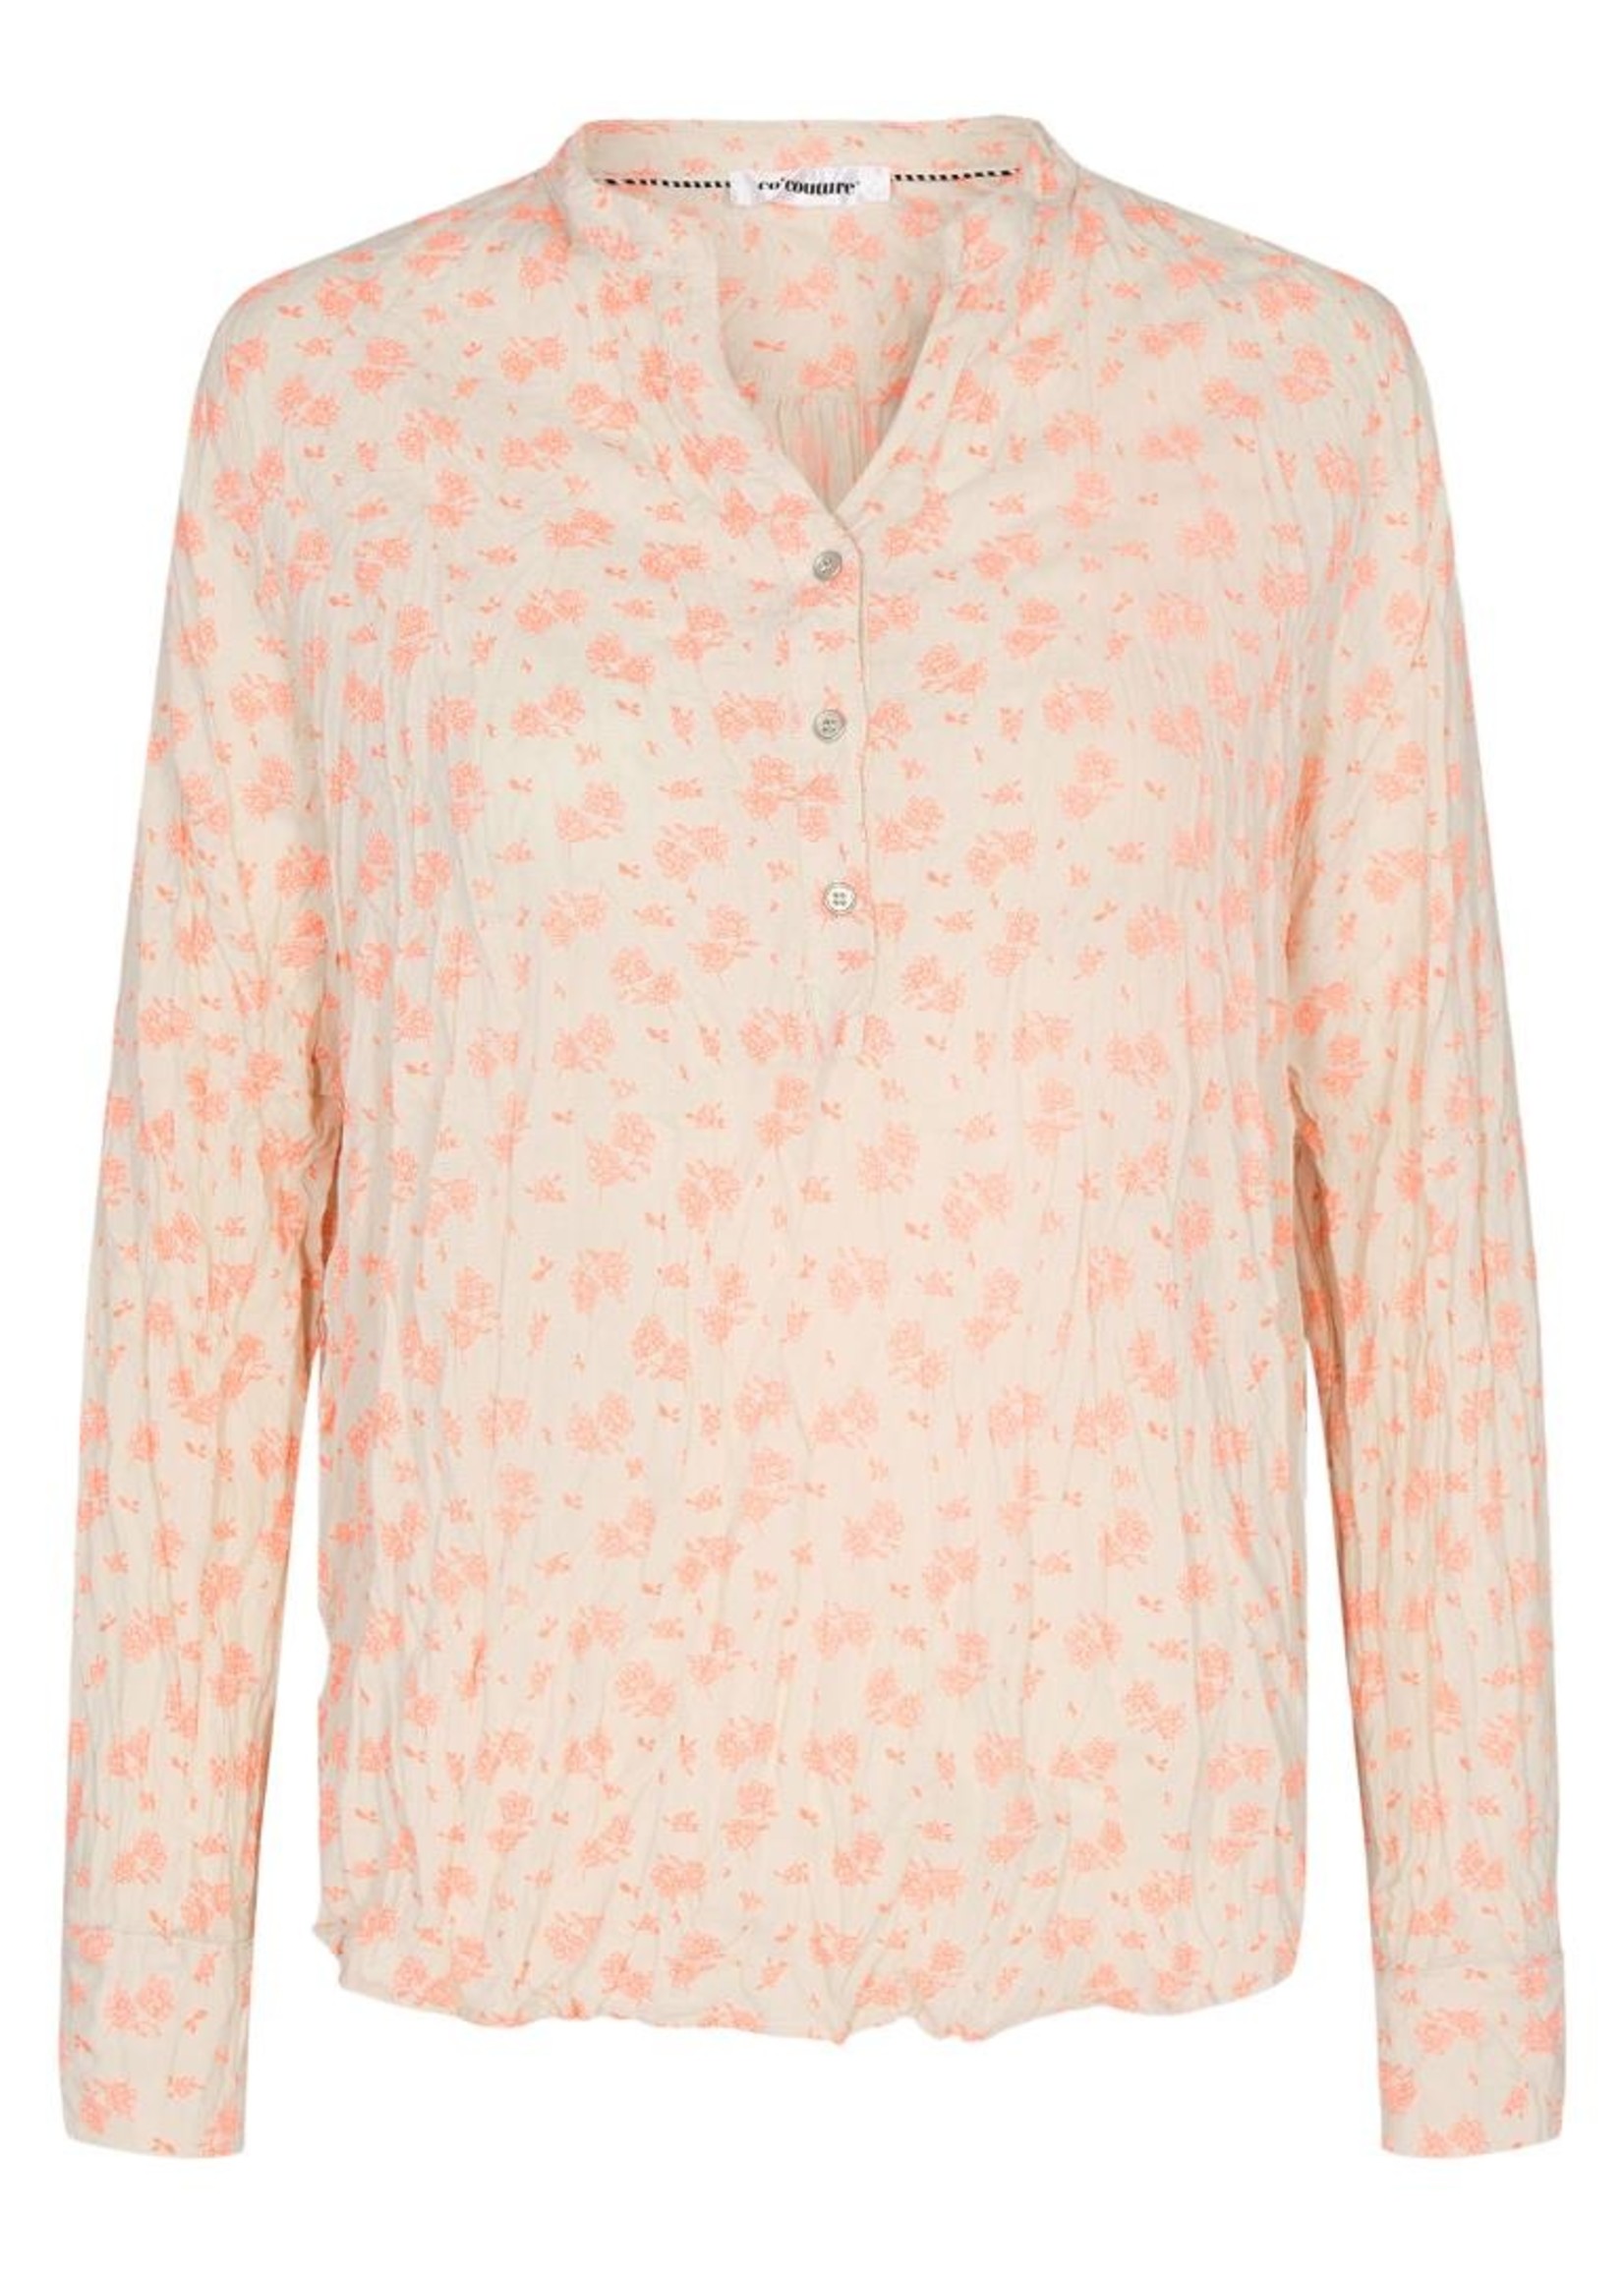 Co' Couture Coco Neo Flower Shirt - Orange